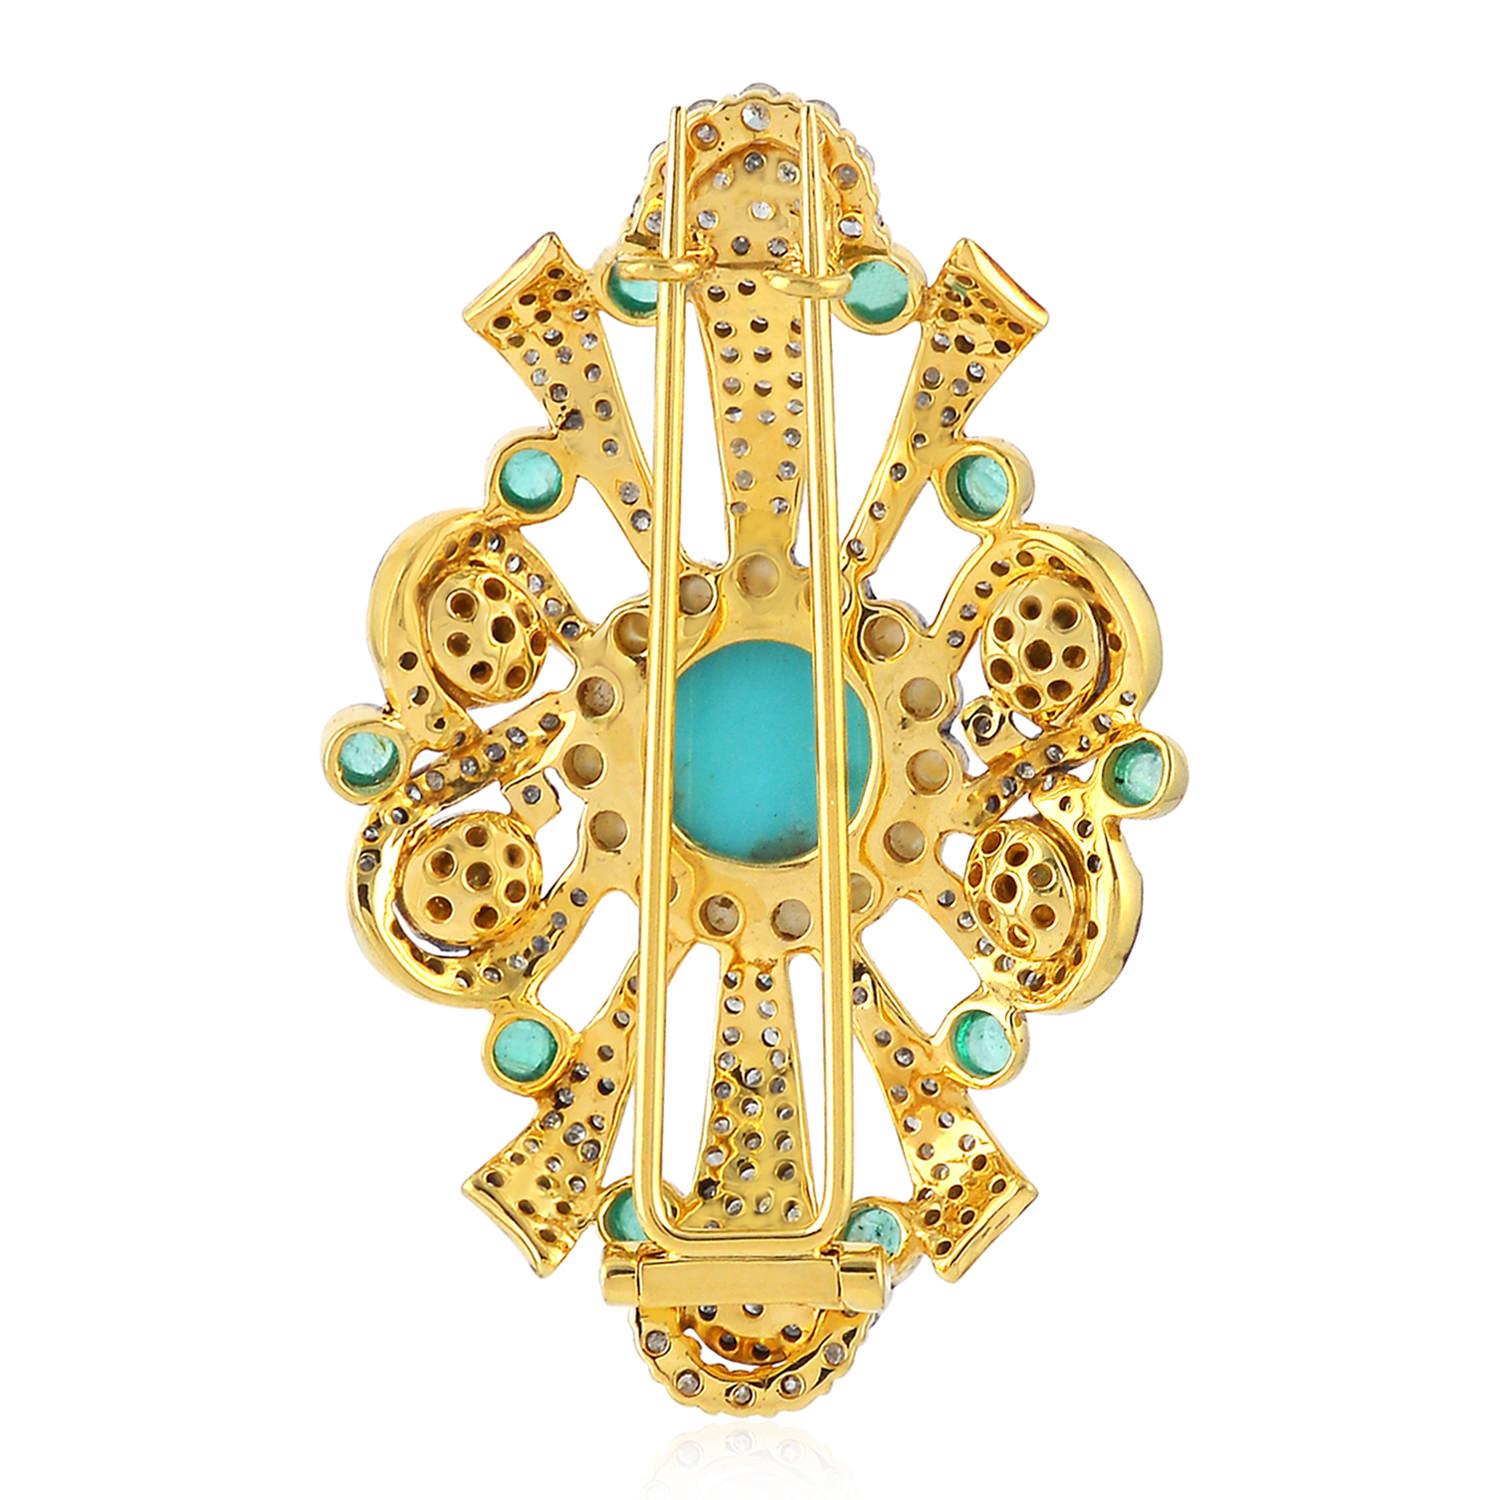 A stunning brooch cast in 18K gold & sterling silver. It is hand set with 1.03 carats emerald, .84 pearl, turquoise and 2.59 carats of sparkling diamonds.

FOLLOW  MEGHNA JEWELS storefront to view the latest collection & exclusive pieces.  Meghna